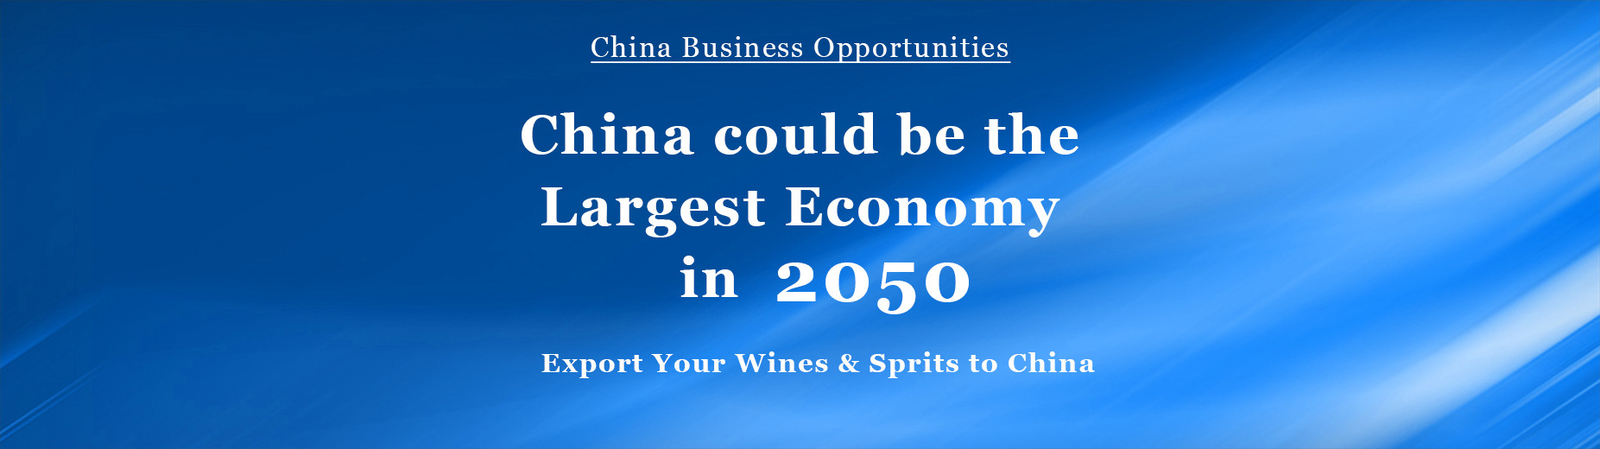 Shipping Exporting Wine To China Wine Market In China Weibo Account Promote  Statistics